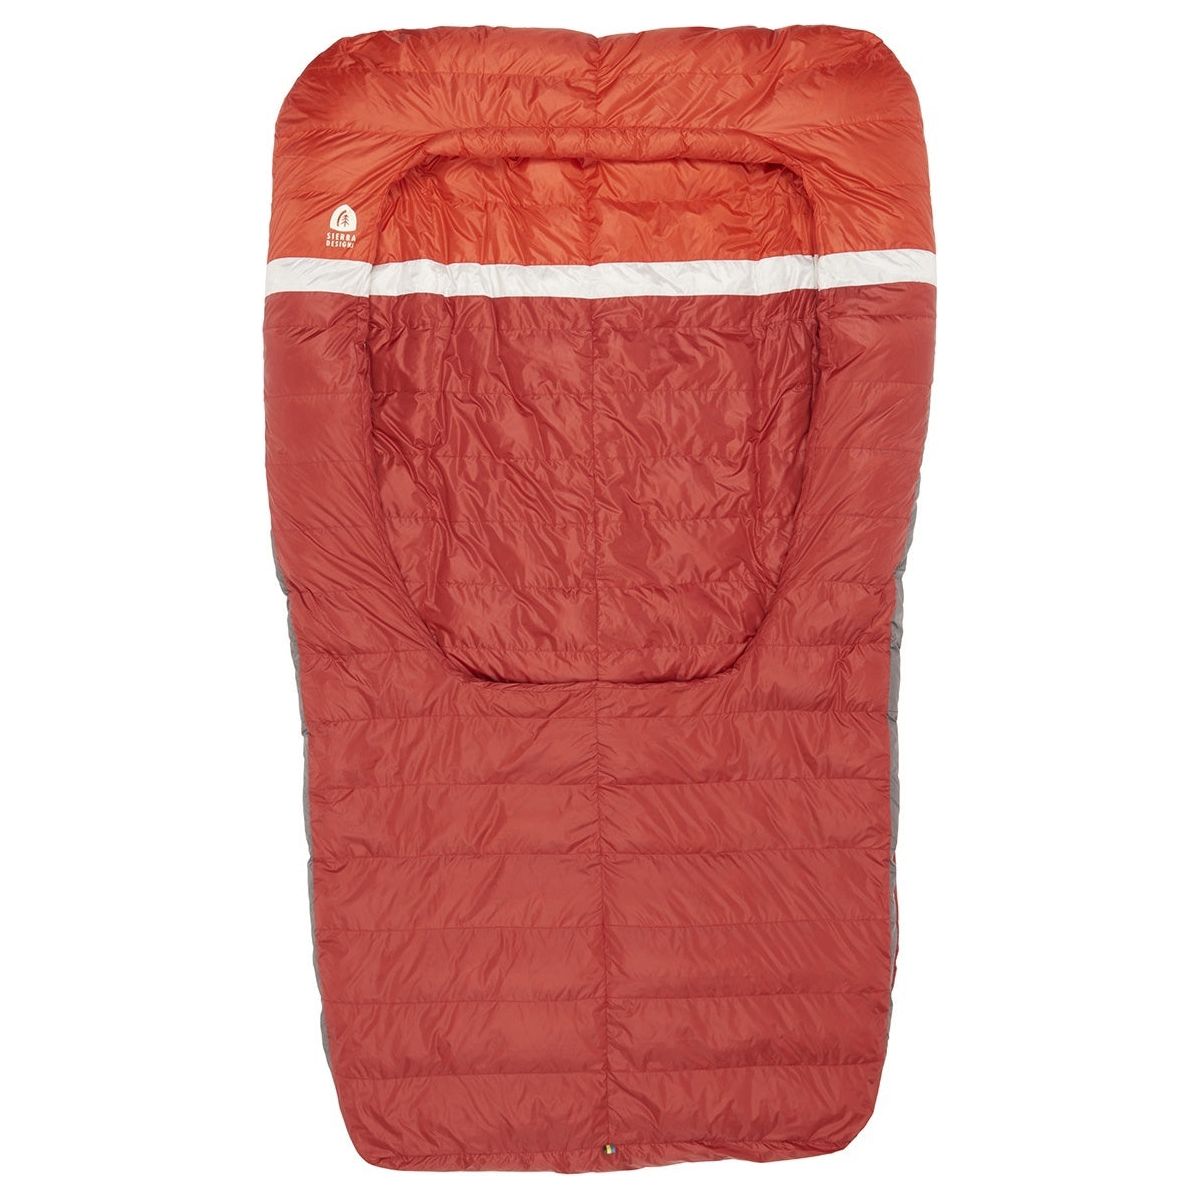 Sierra Designs Backcountry Bed Duo 650F 20° Degree Down Sleeping Bag - Red